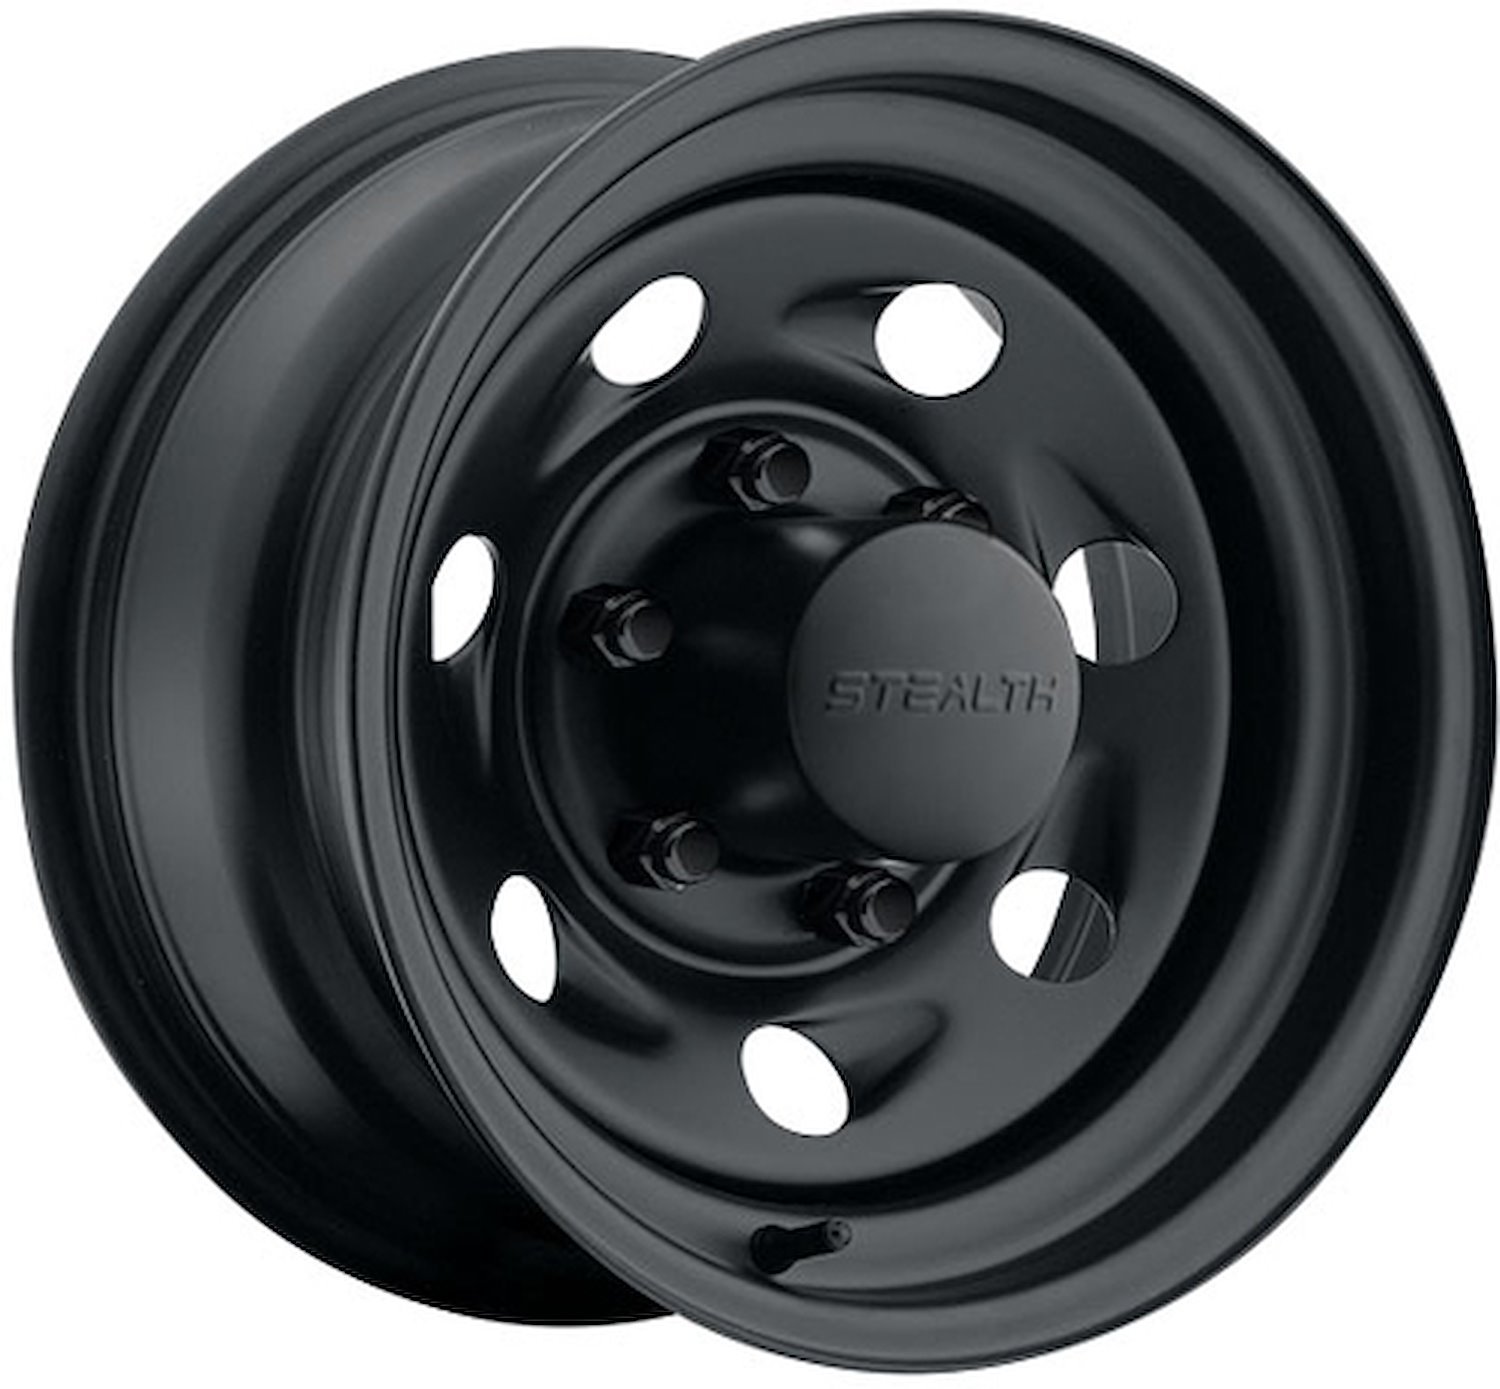 STEALTH BLACK VORTEC 16 x 7 6 x 55 Bolt Circle 4 Back Spacing 0 offset 428 Center Bore 2200 lbs Load Rating